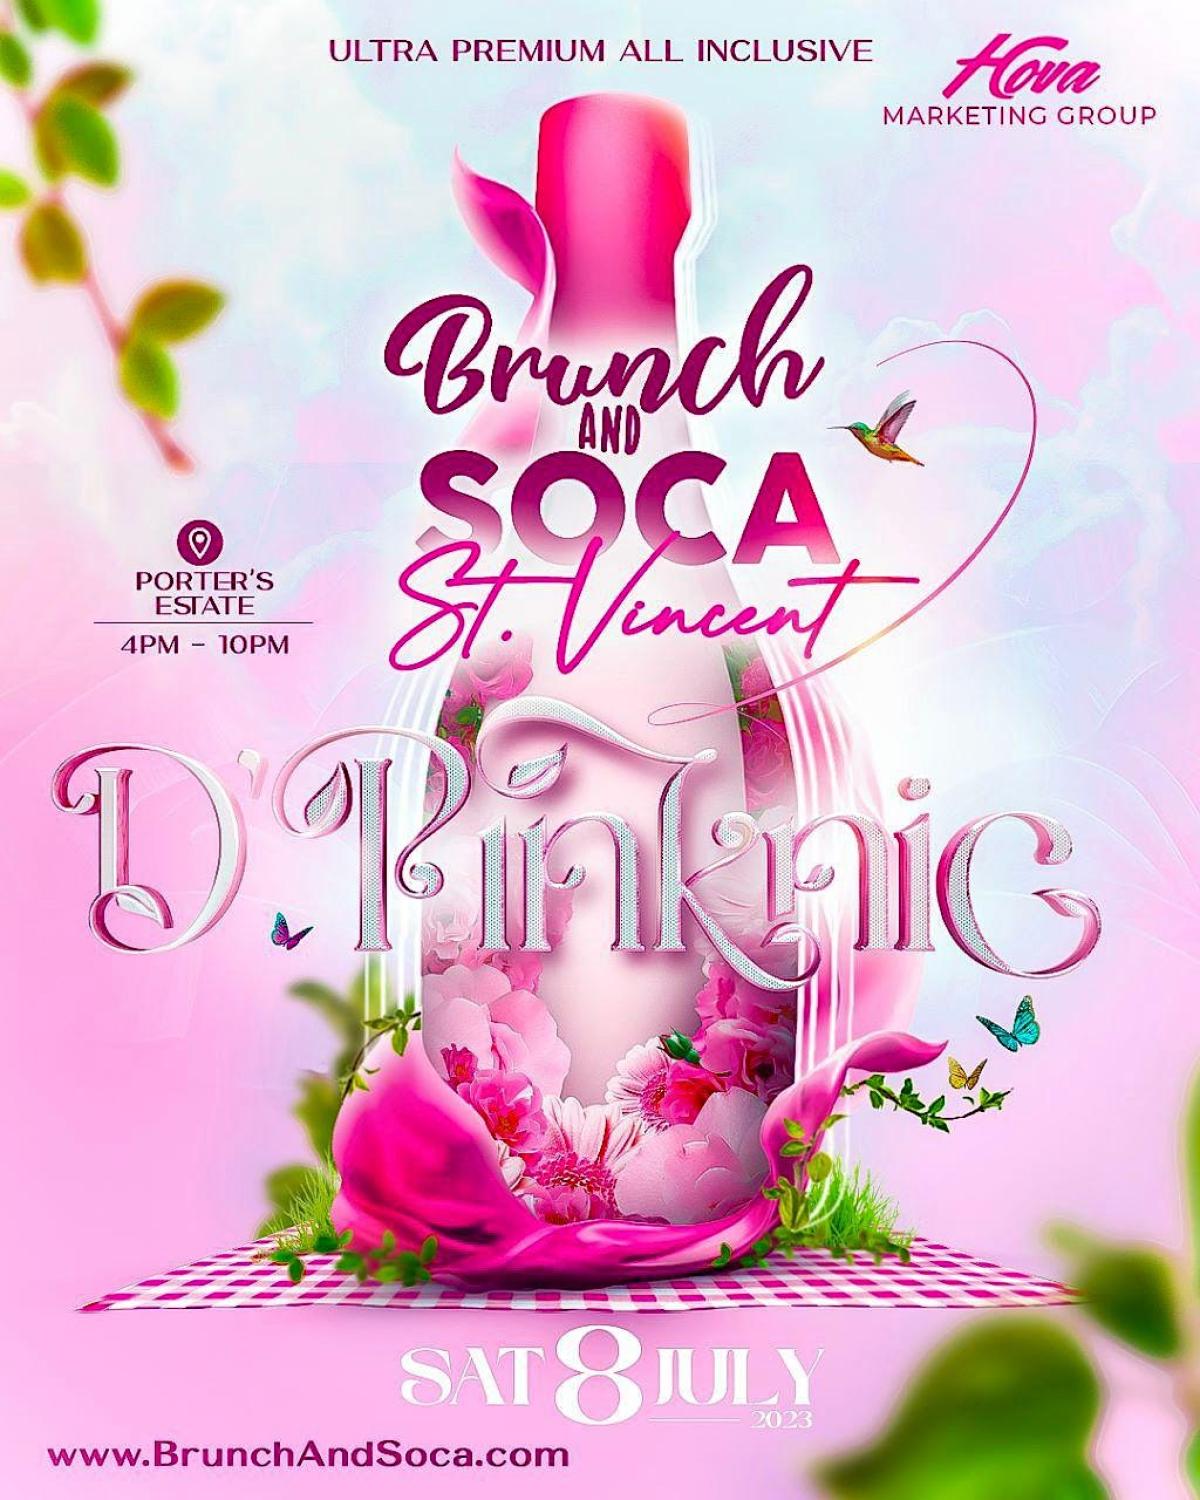 Brunch And Soca: D' Pinknic flyer or graphic.